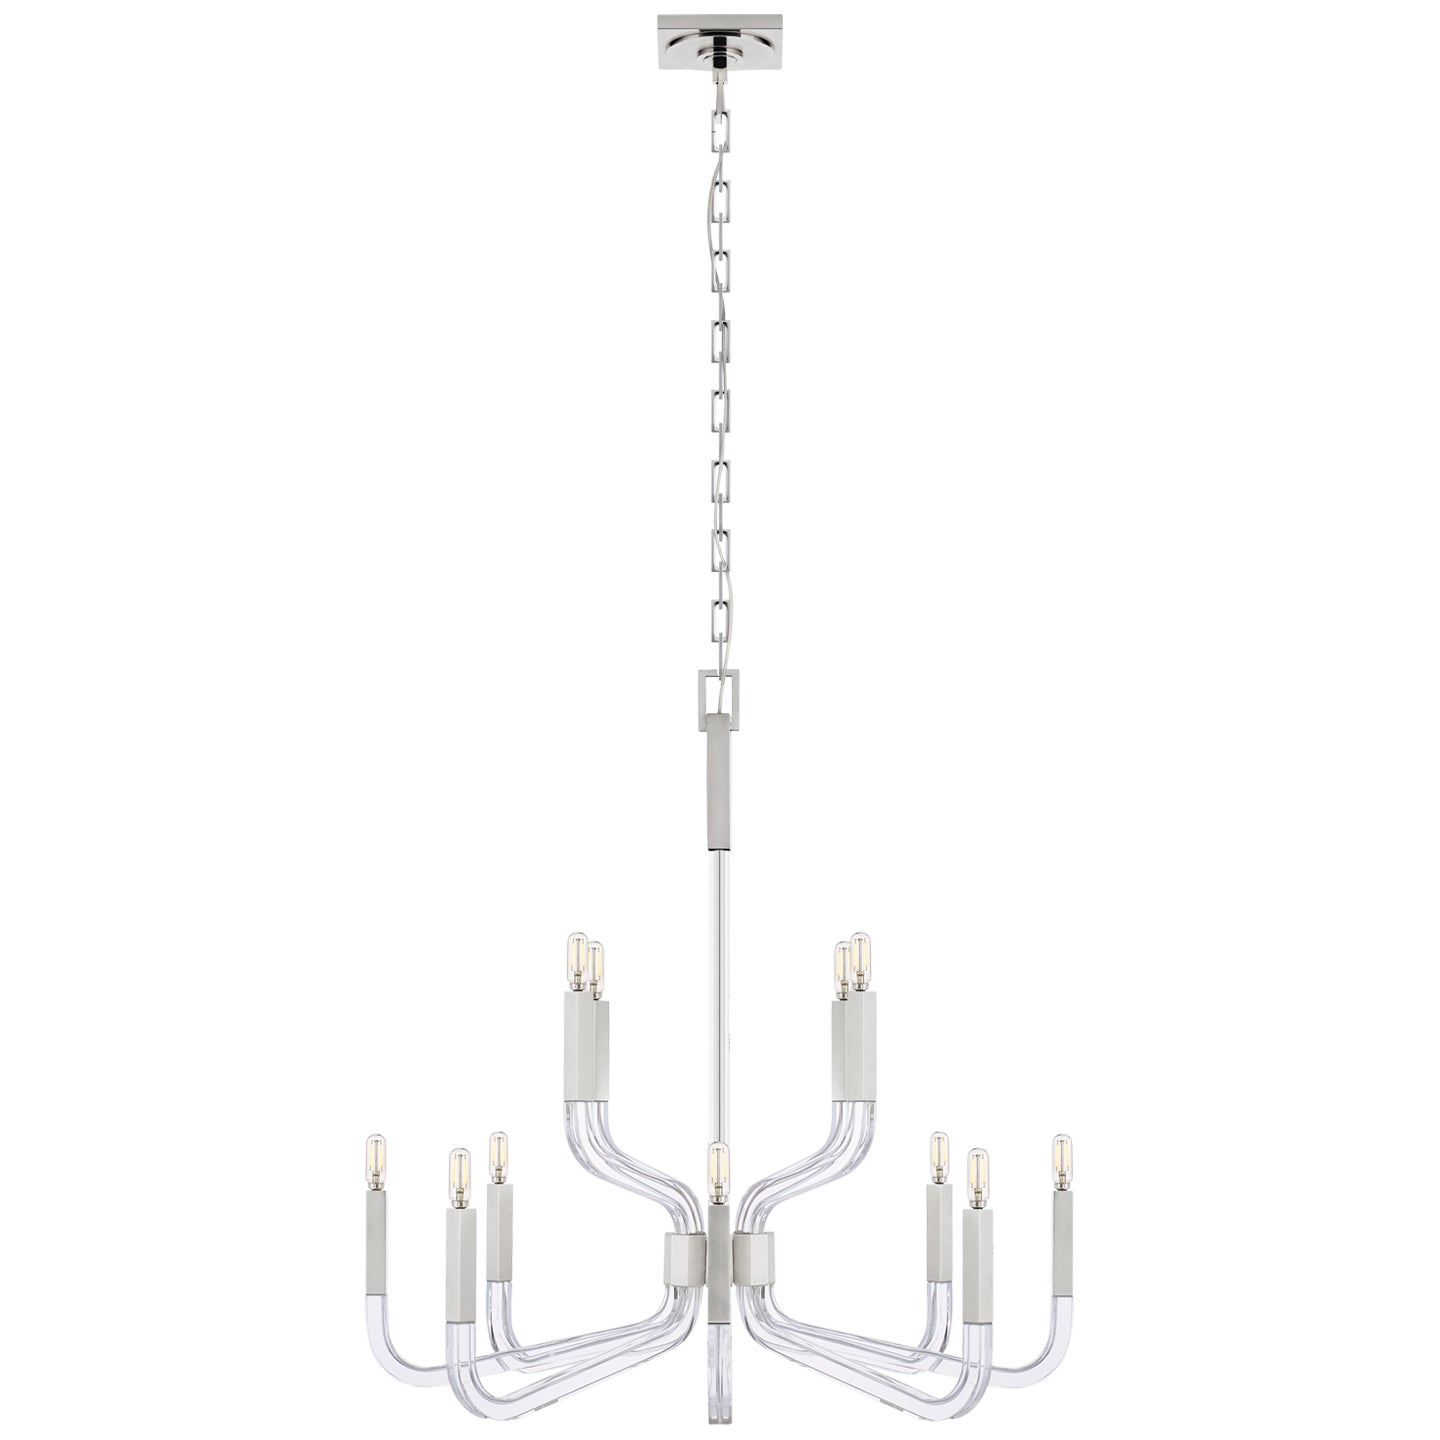 Load image into Gallery viewer, Visual Comfort Signature - CHC 5903PN/CG - 12 Light Chandelier - Reagan - Polished Nickel and Crystal
